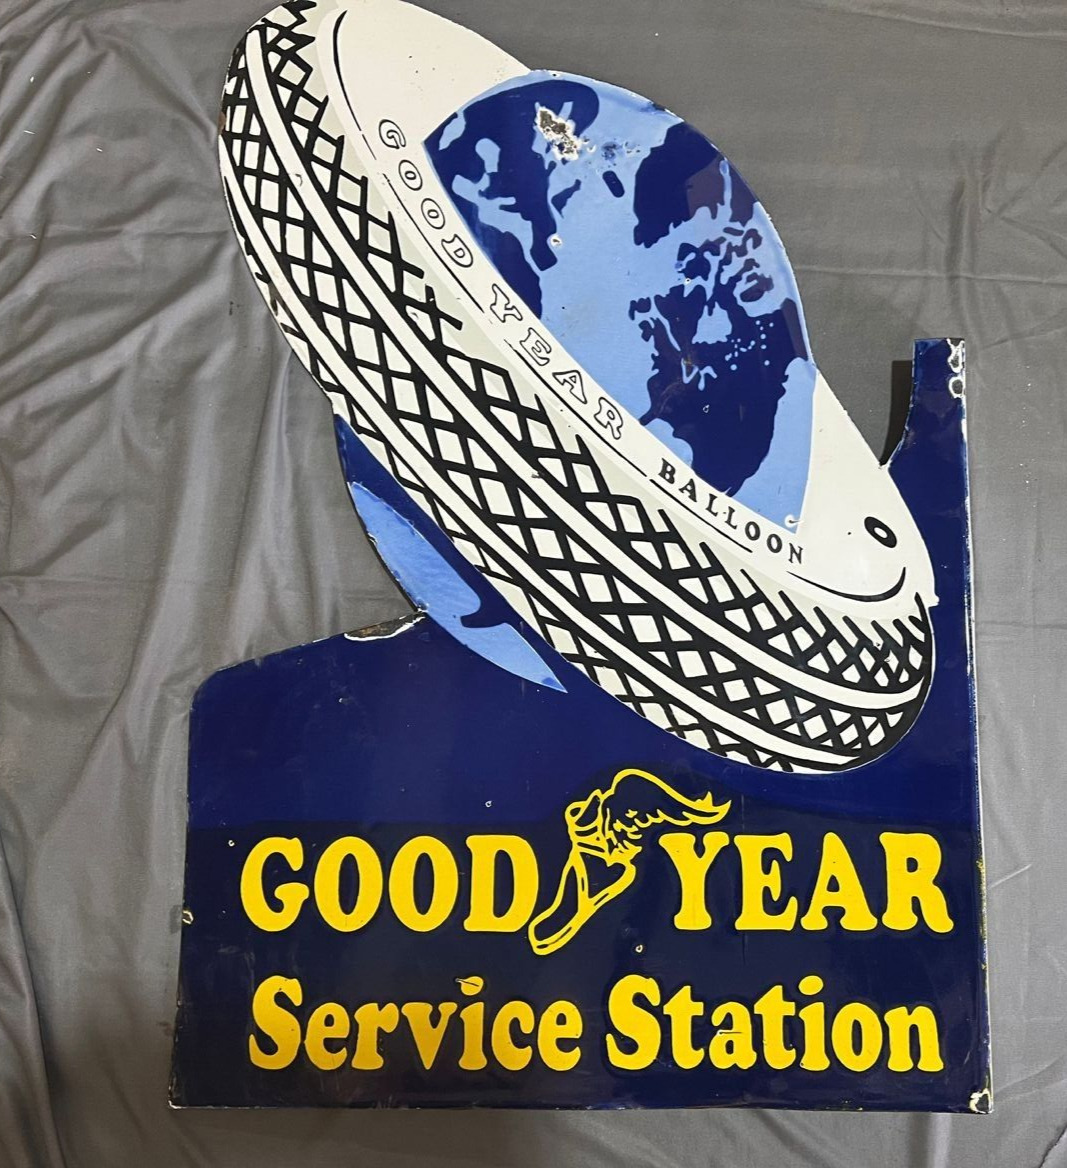 PORCELIAN GOOD YEAR SERVICE STATION ENAMEL SIGN SIZE 36X24 INCHES 2 SIDED FLANGE